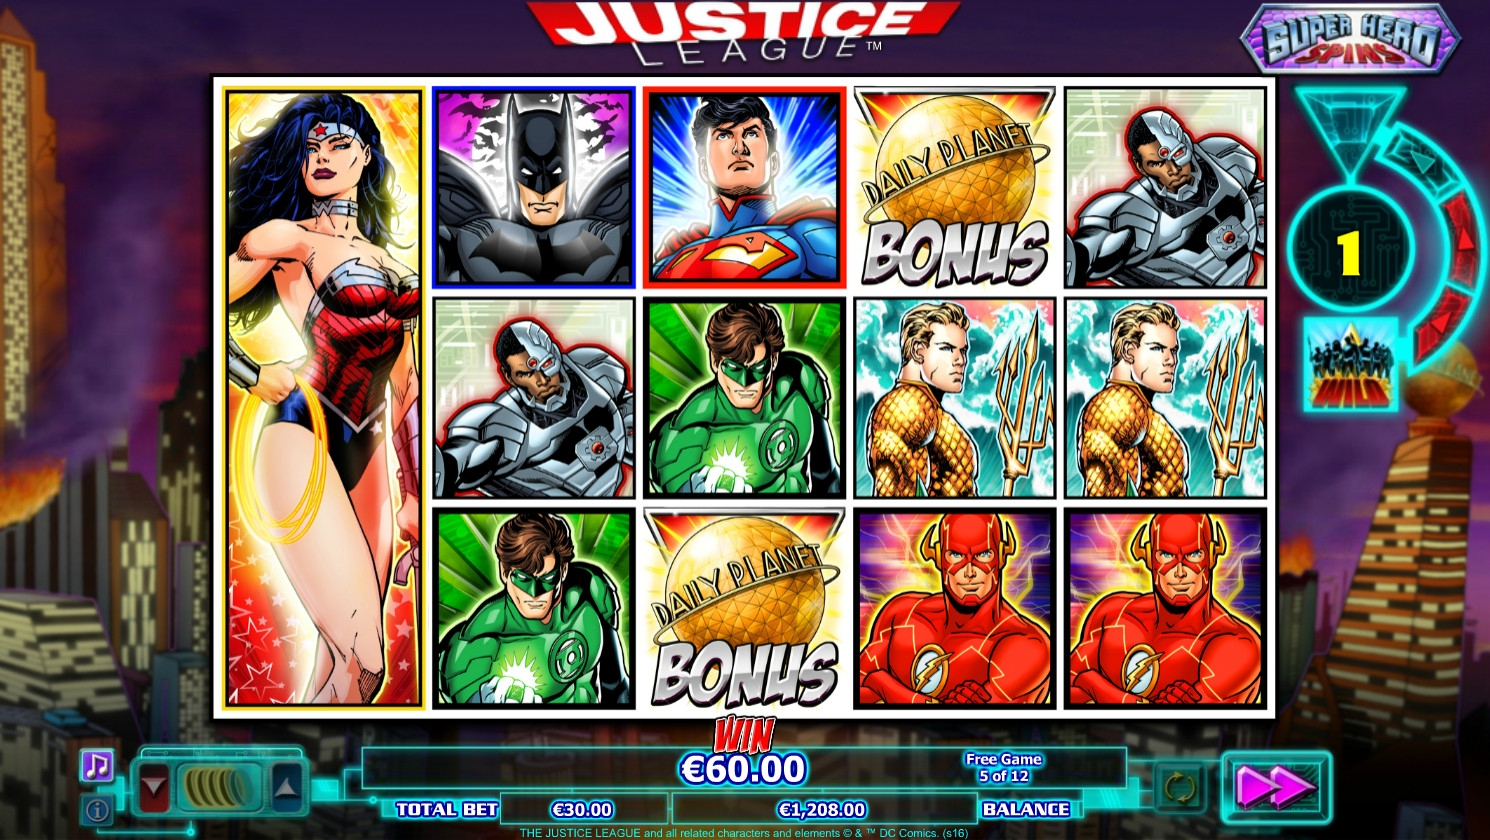 Justice League (Justice League) from category Slots